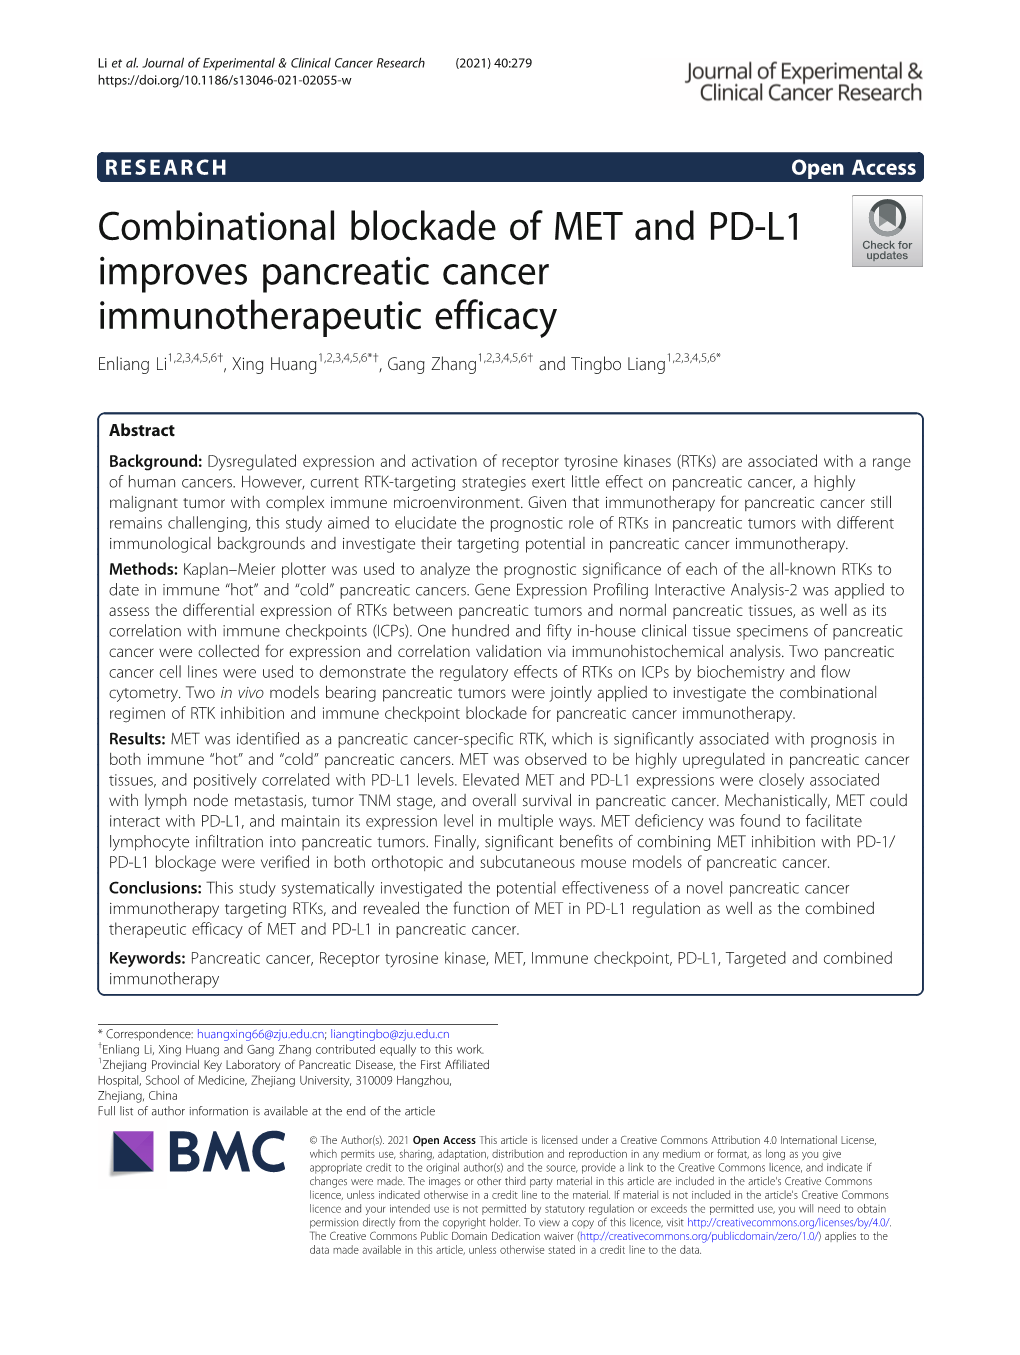 Combinational Blockade of MET and PD-L1 Improves Pancreatic Cancer